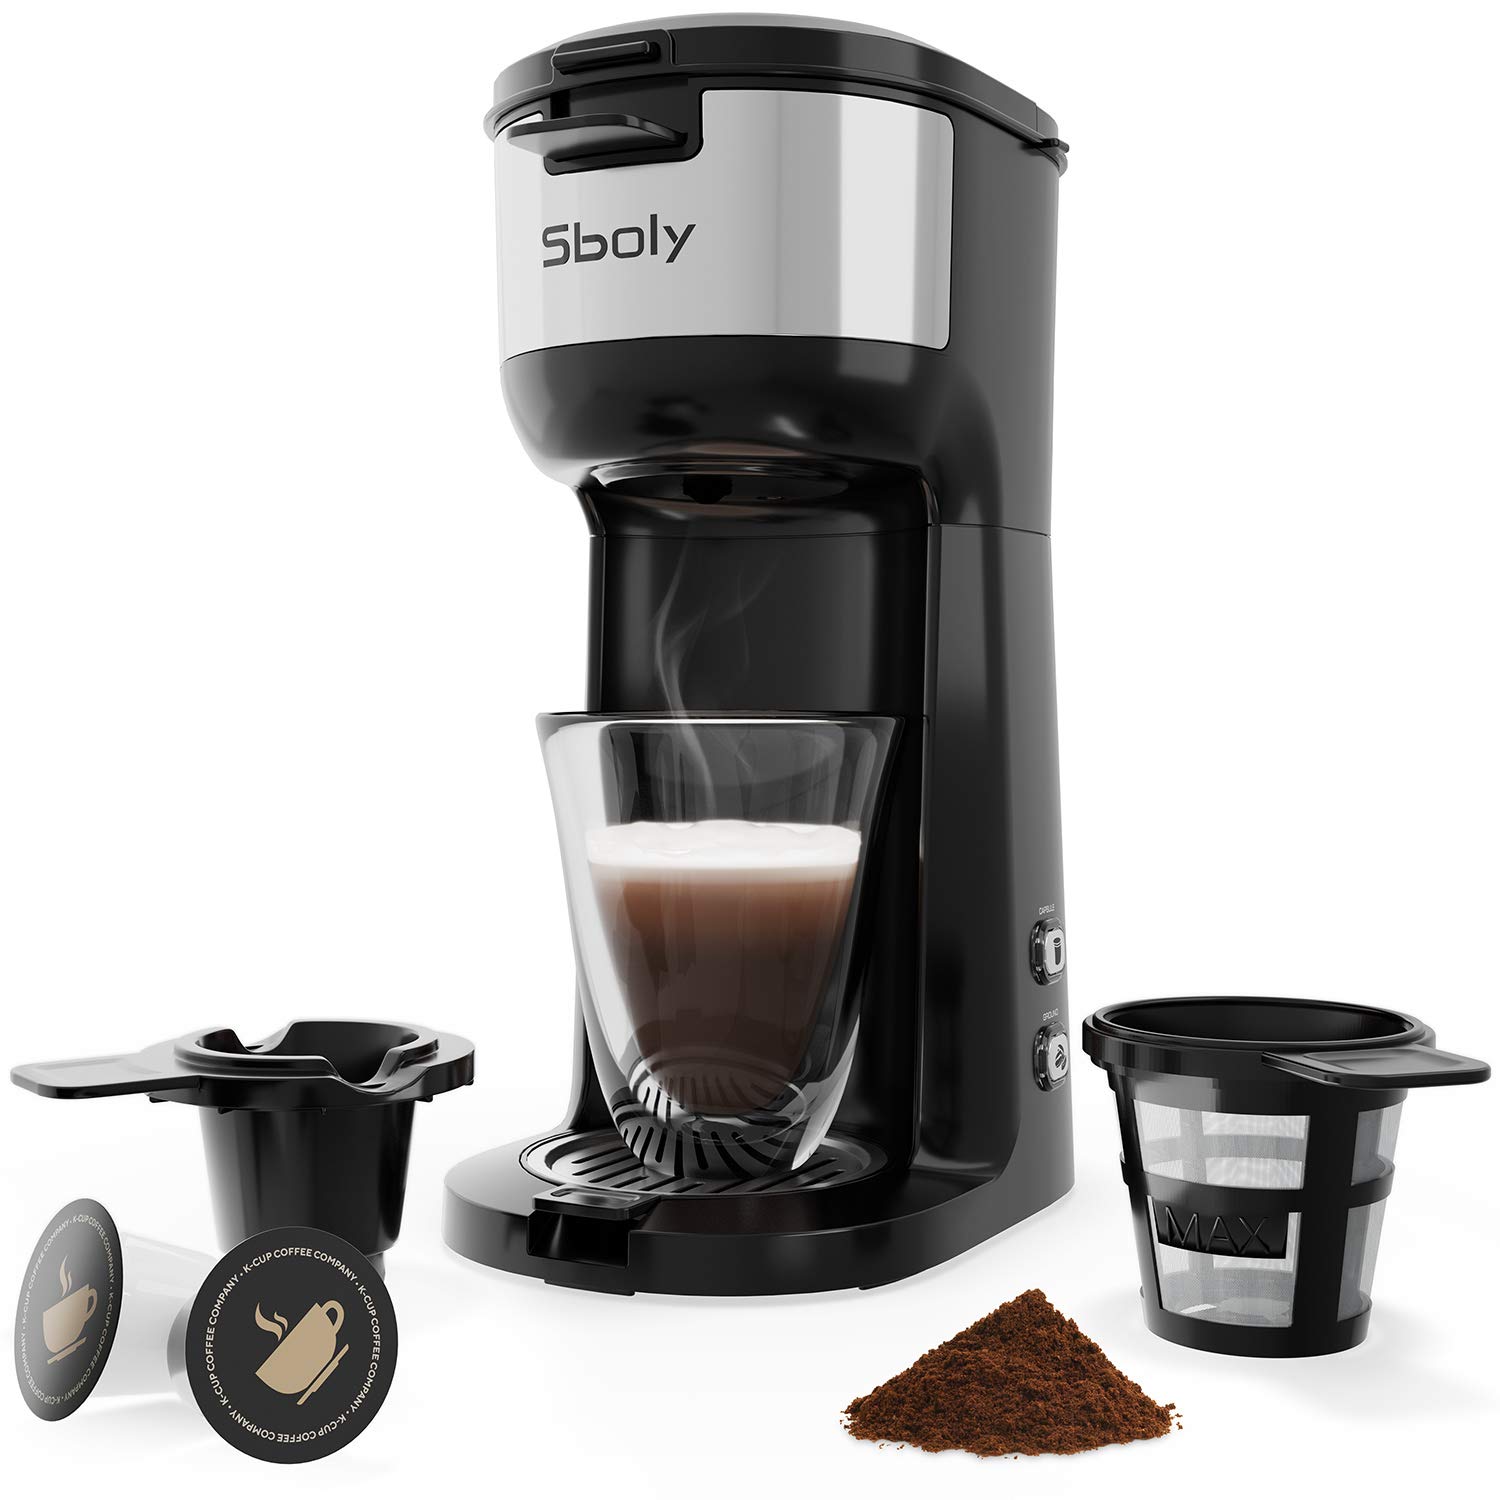 Sboly Coffee Maker And AUKEY Audio Devices, Dash Cams On